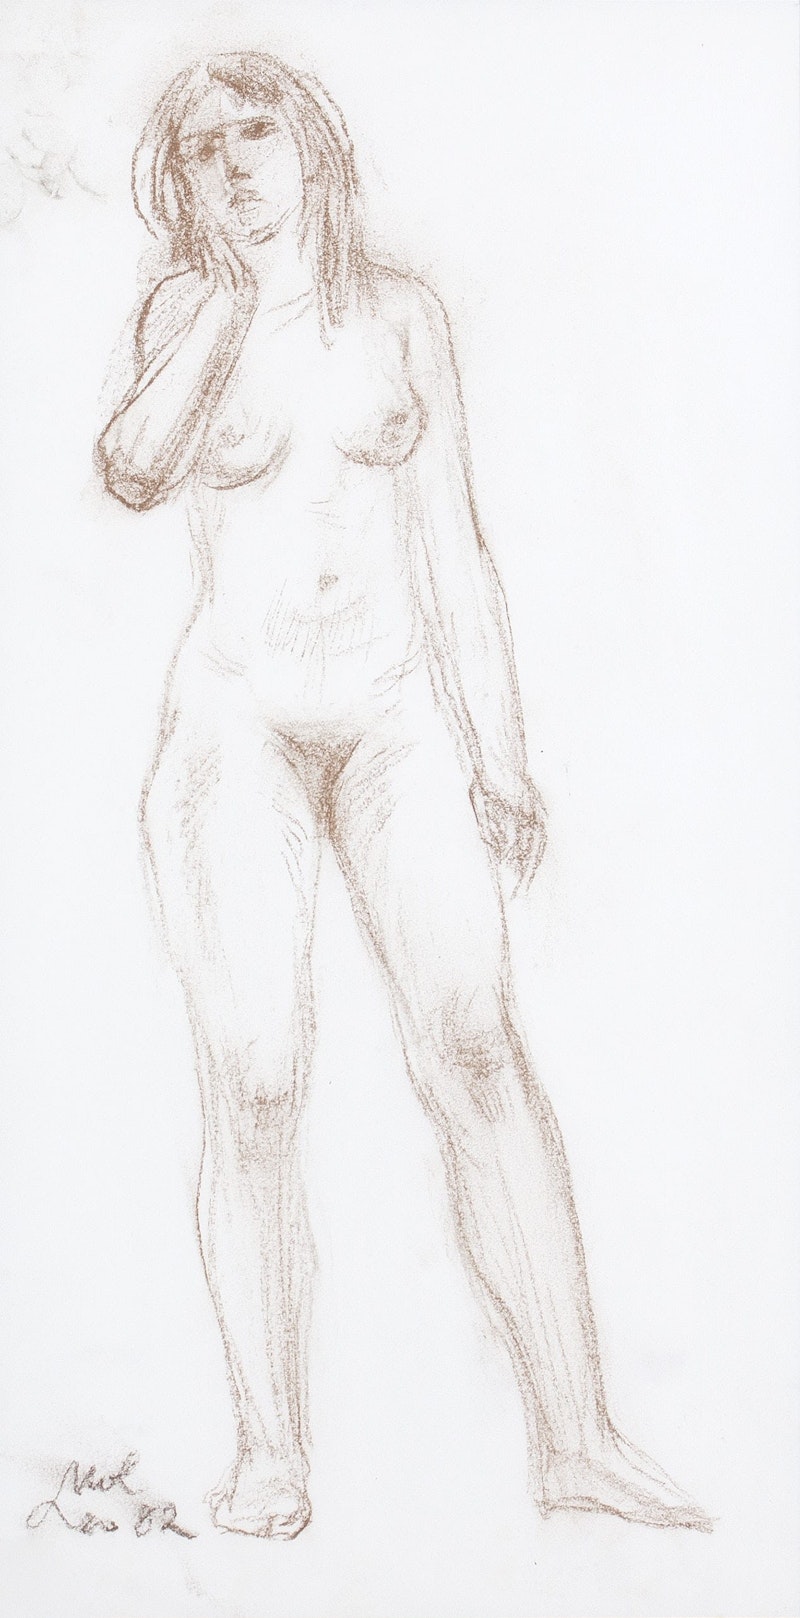 Recollection by Leo Mol, 1982 Conte Crayon on Paper - (16x8 in)